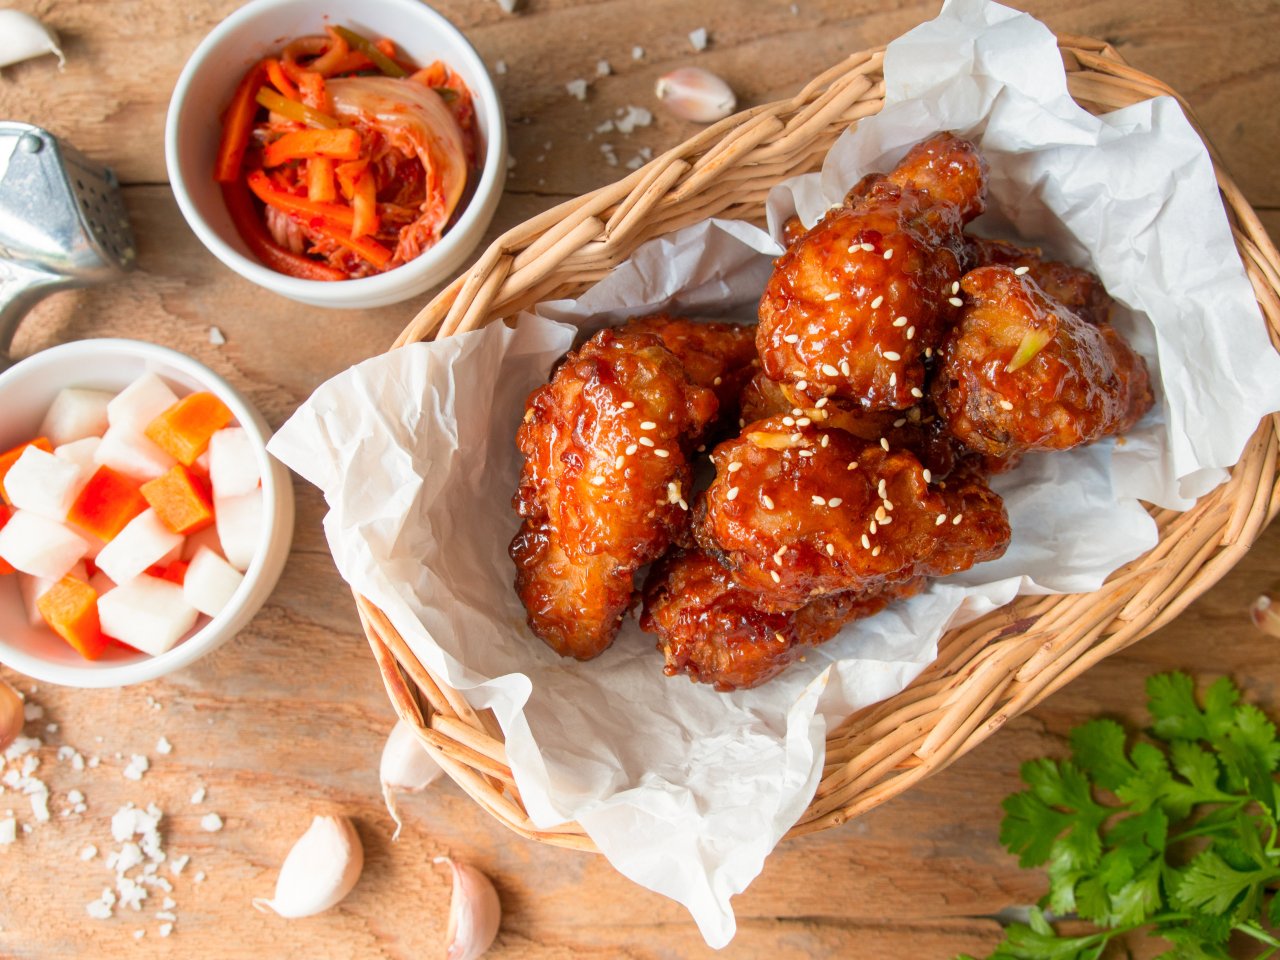 A promotional photo of a Korean fried chicken dish (123rf)